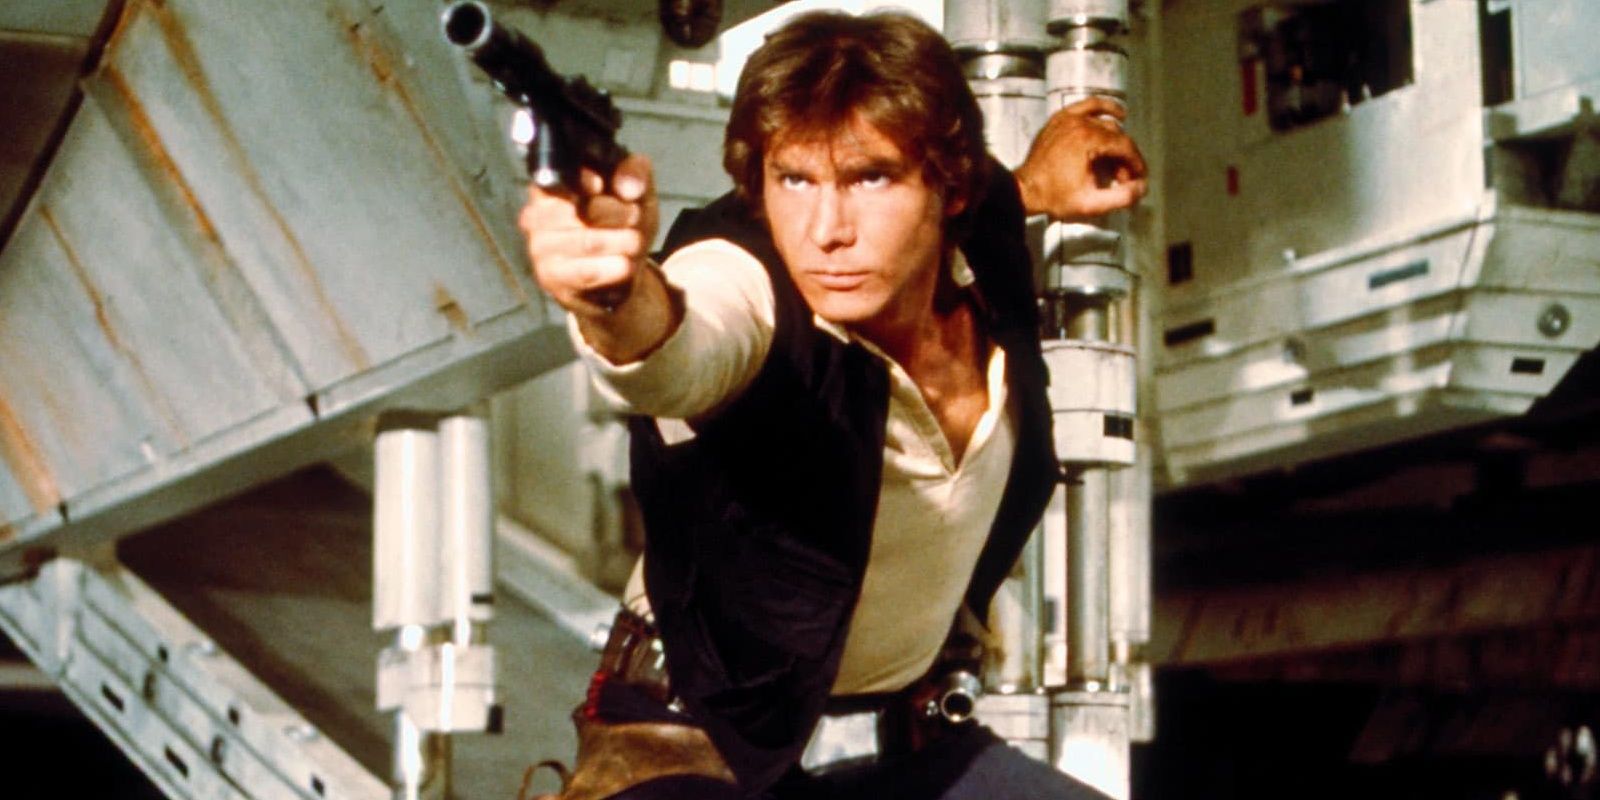 Which Star Wars Original Trilogy Character Are You Based On Your Zodiac Sign